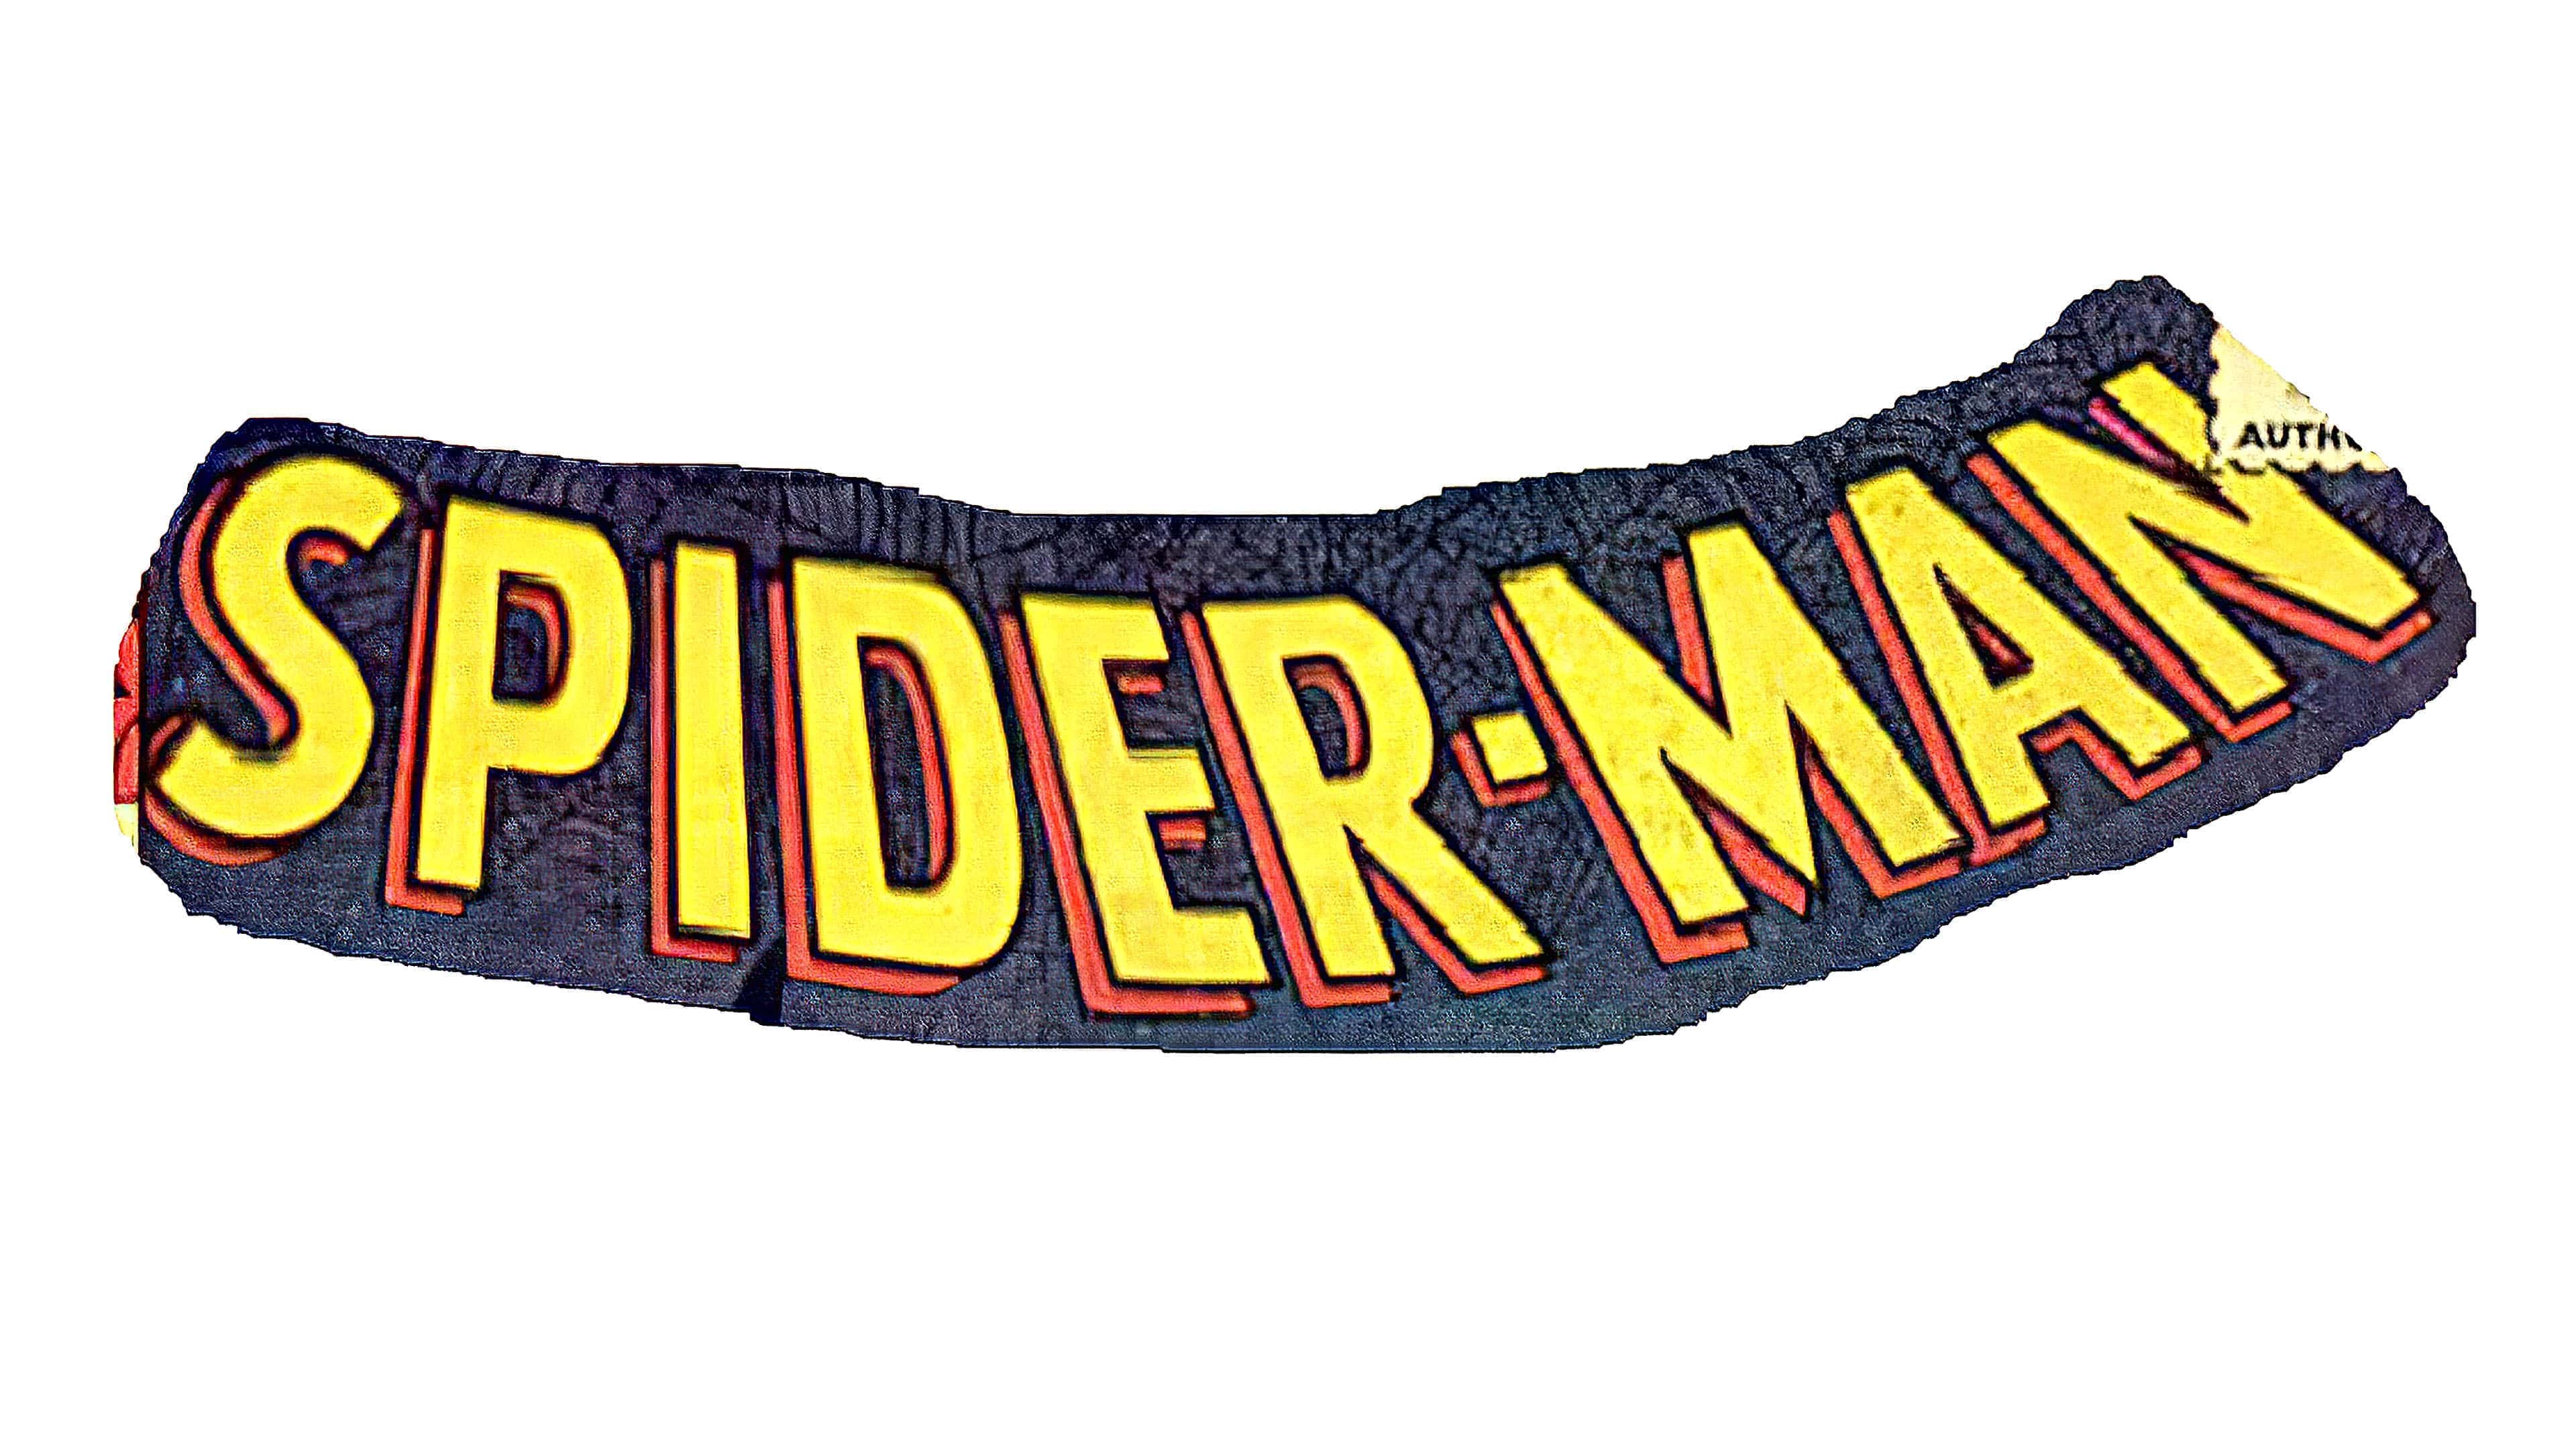 Spiderman Logo, PNG, Symbol, History, Meaning